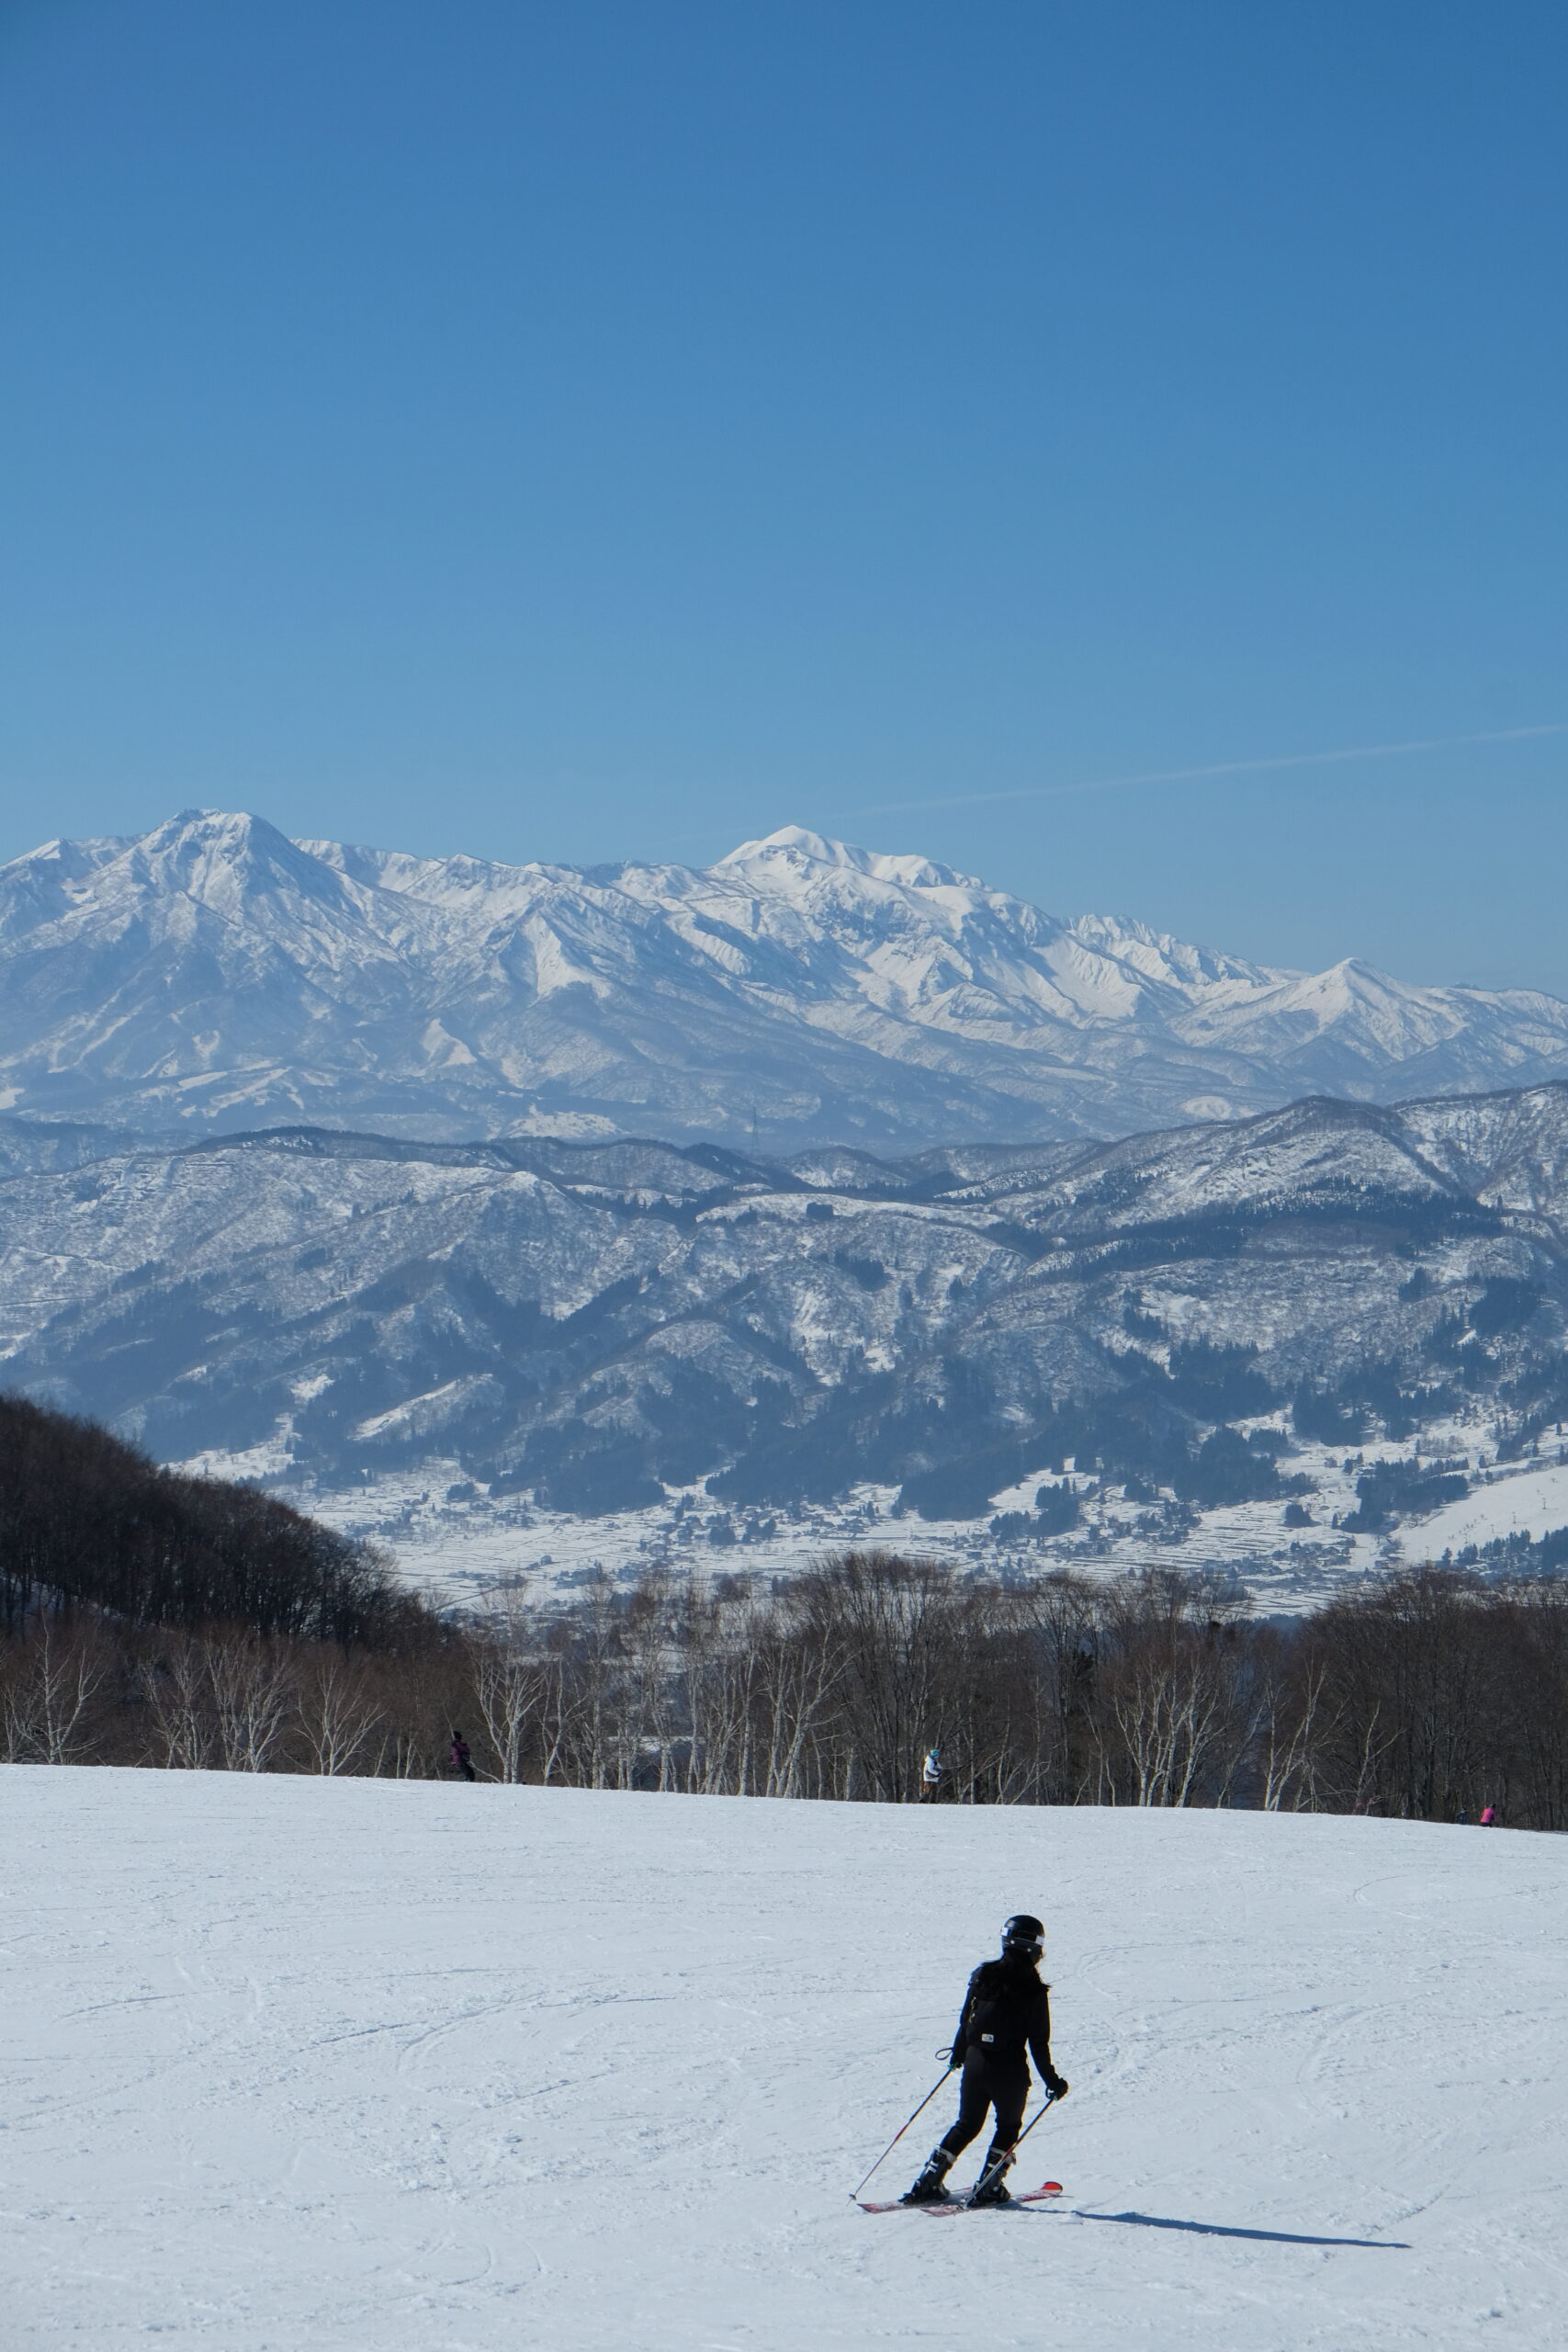 Scenic views from Paradise slope in the winter season